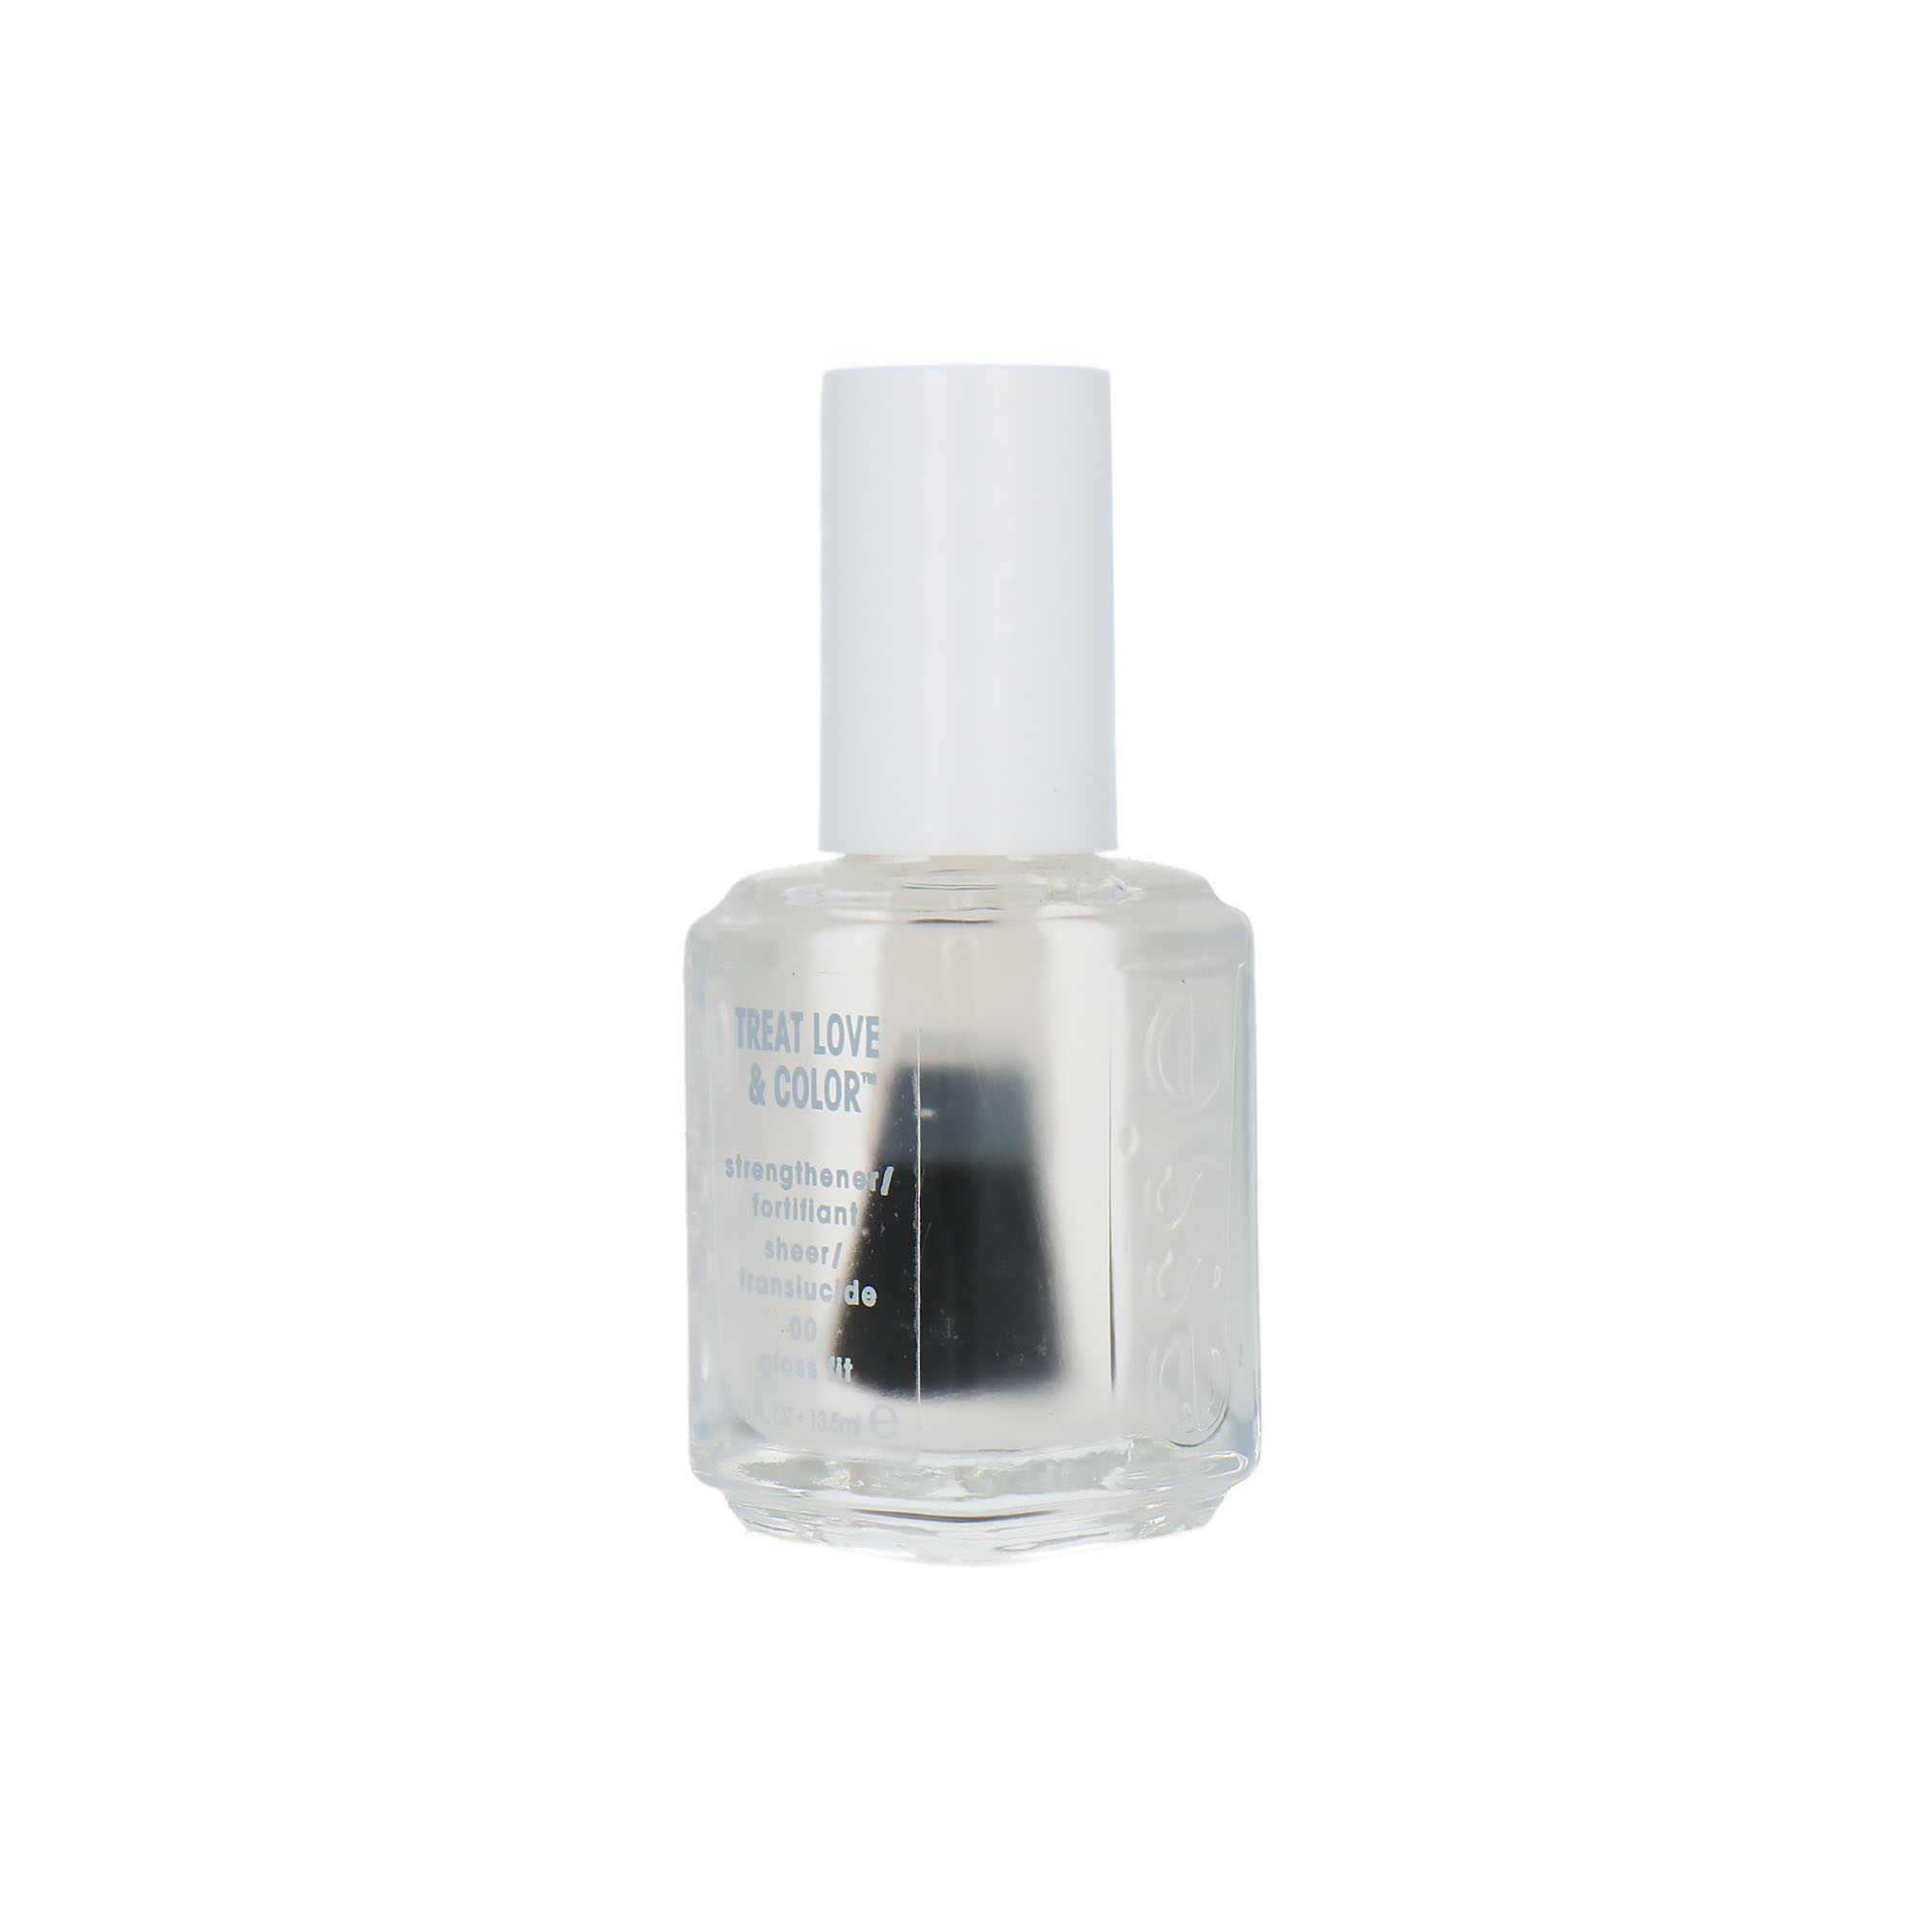 Essie Treat Love & Color Strengthener Nagellack - 00 Gloss Fit Kaufen -  Blisso